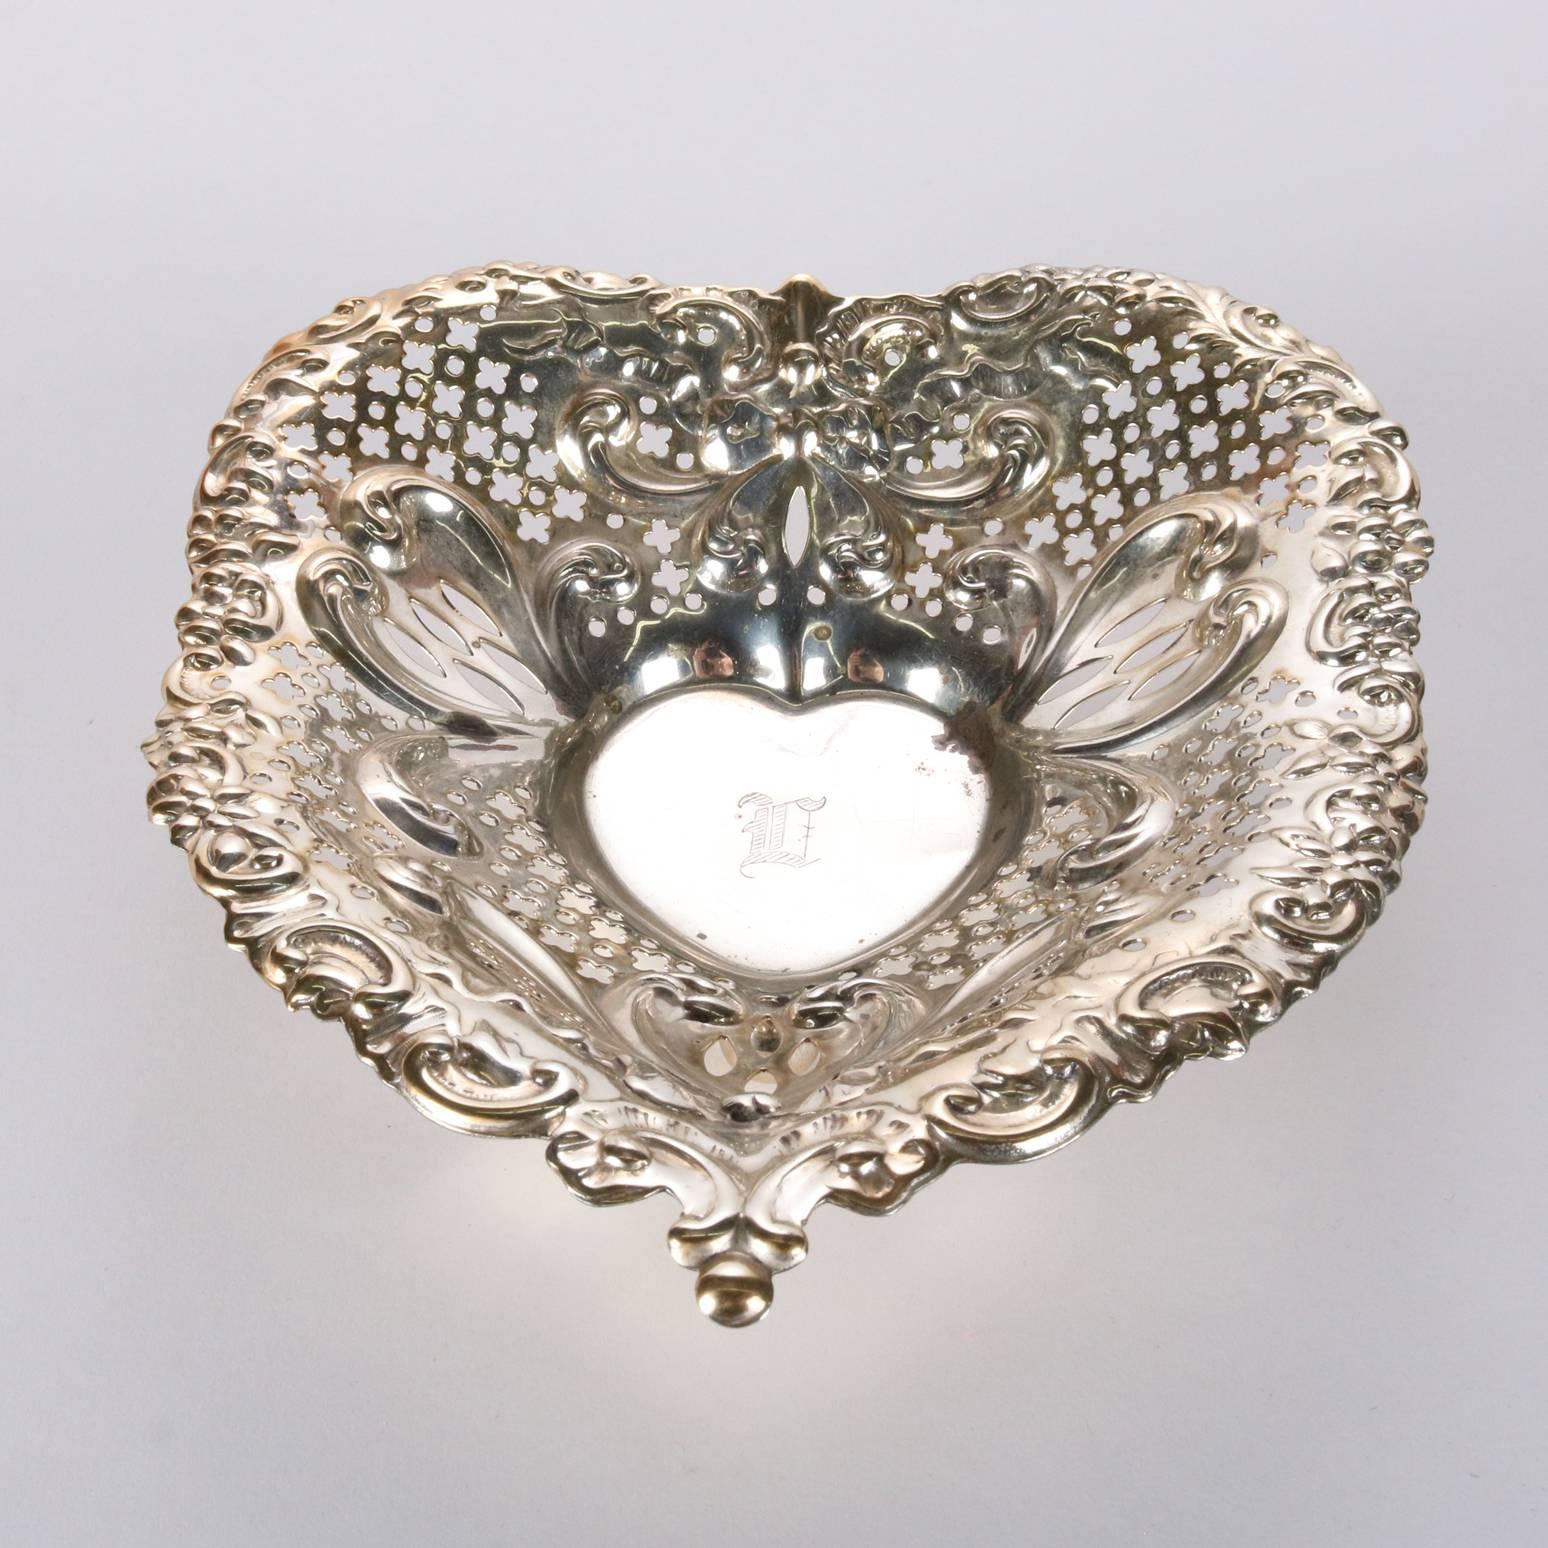 19th Century Antique Sterling Silver Gorham Heart Shaped Reticulated and Footed Dish